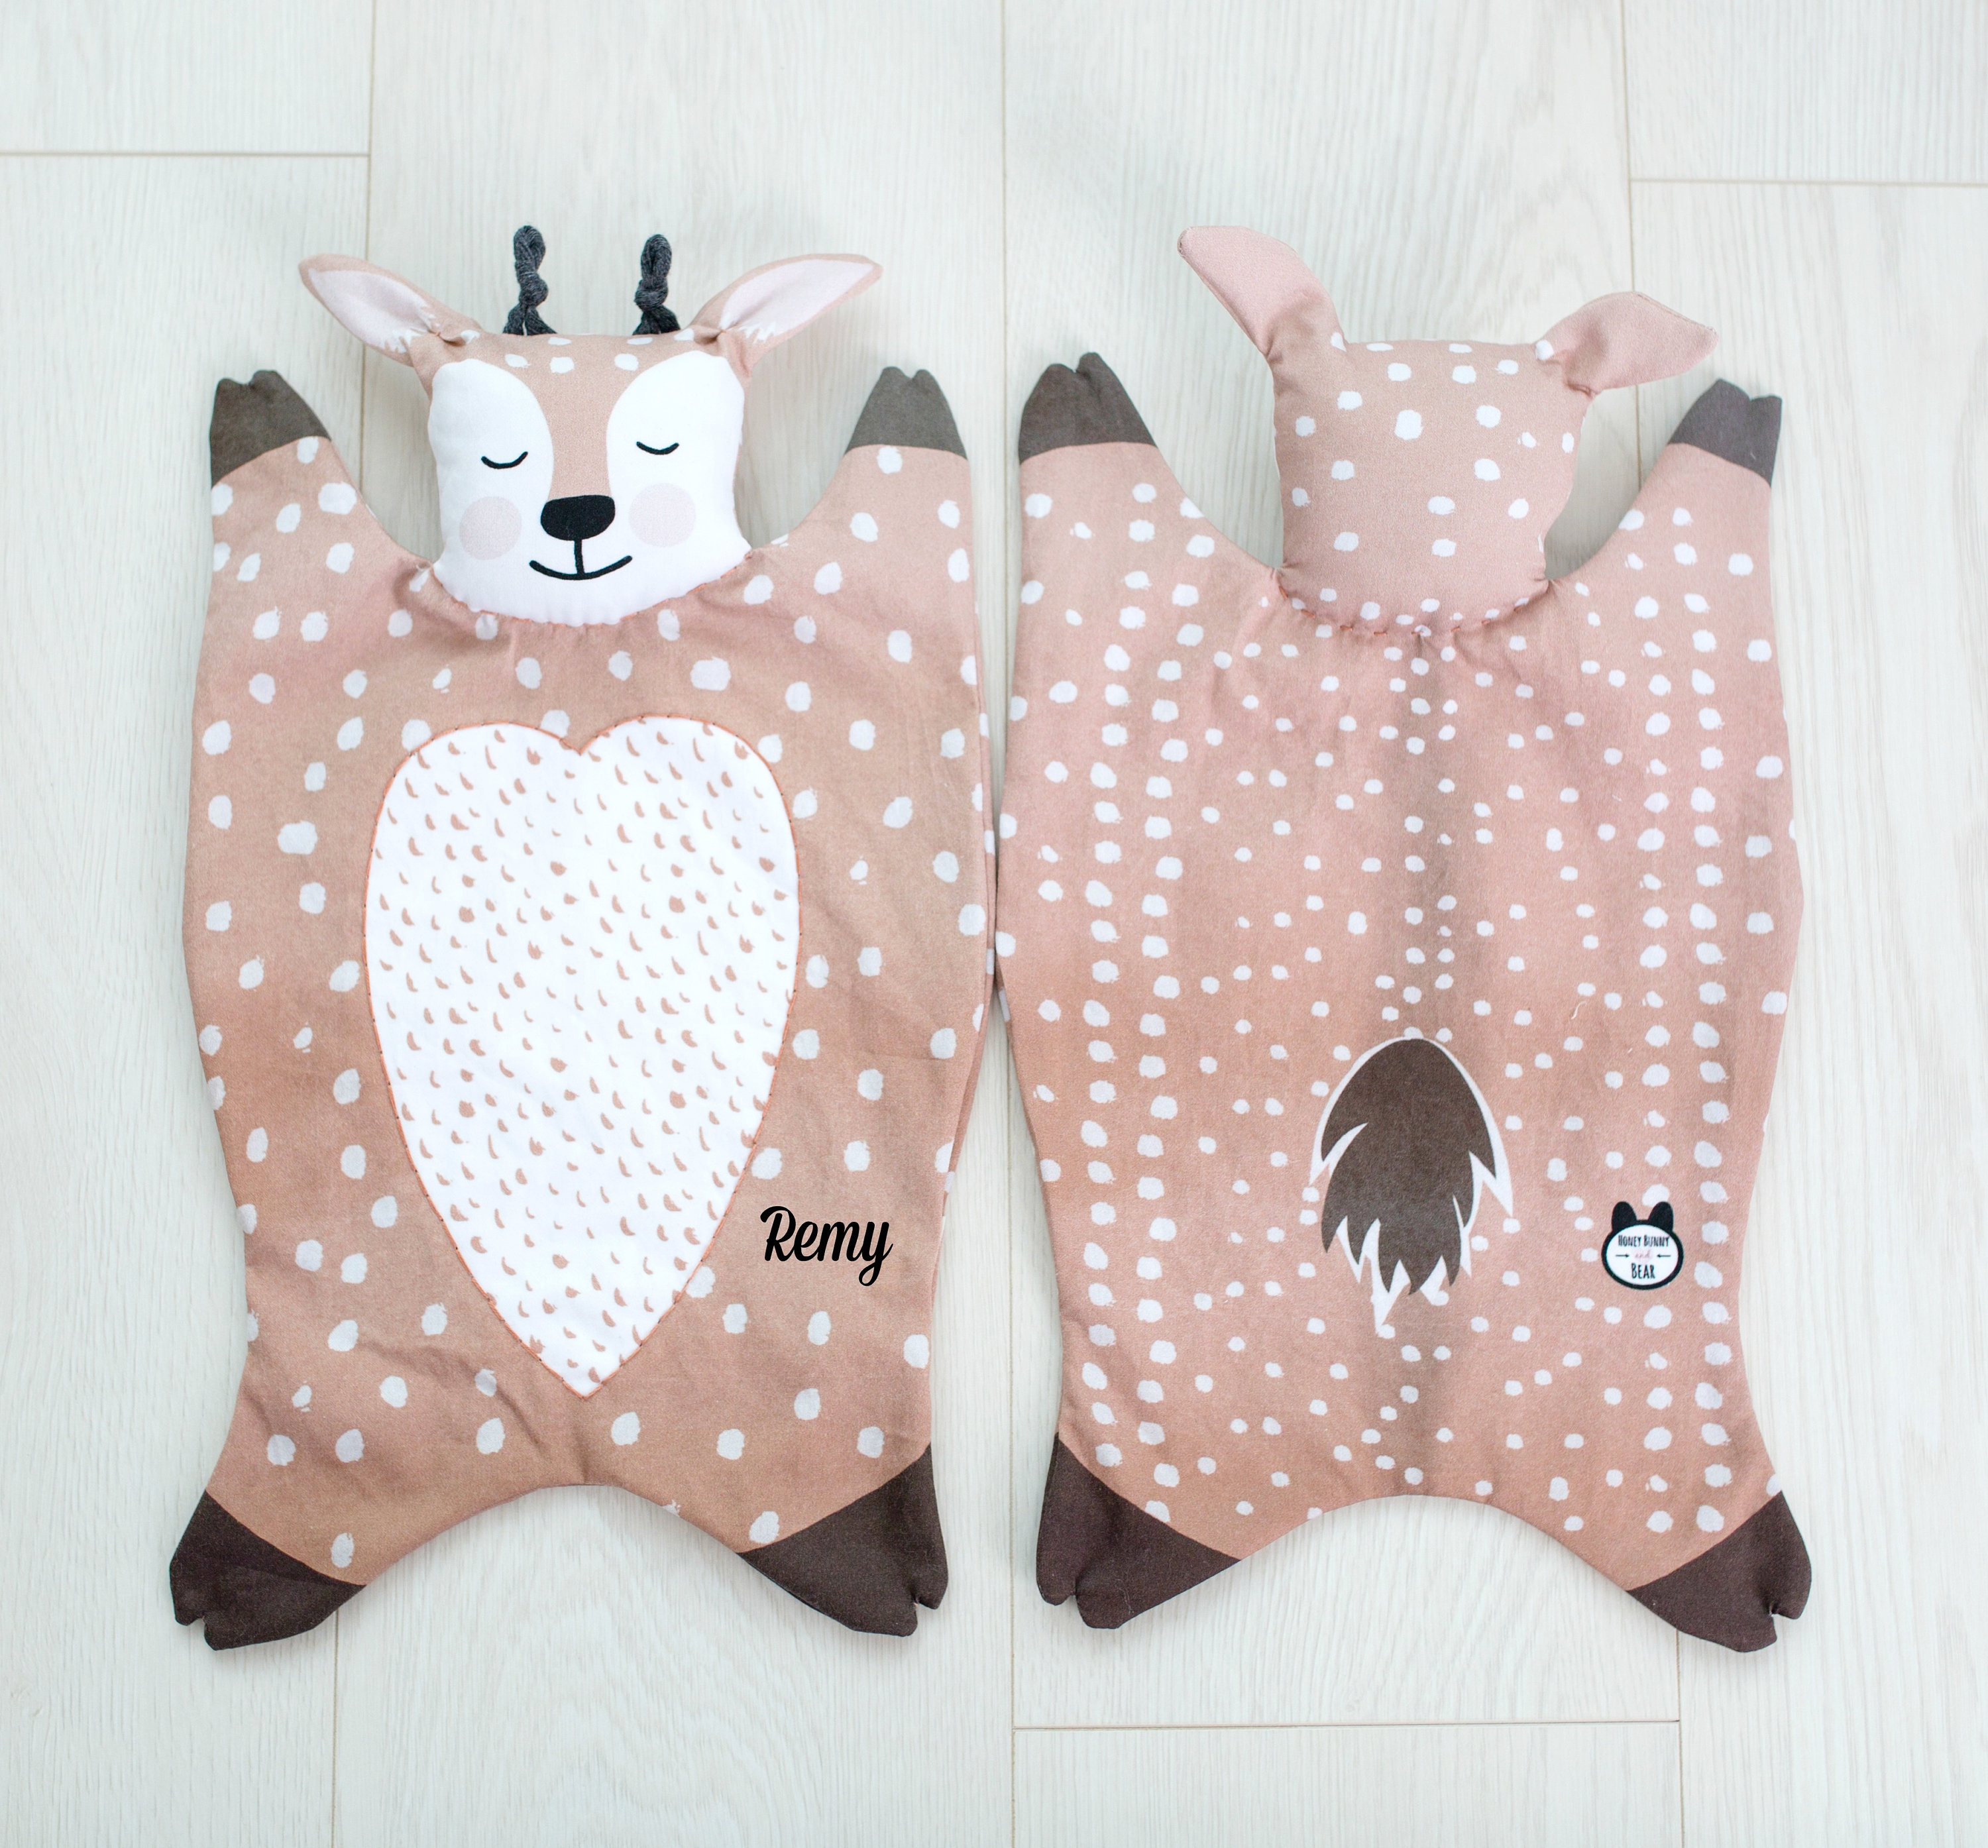 BABY BODYSUIT EXTENDERS Add Length to Baby's Onesies. Also Great